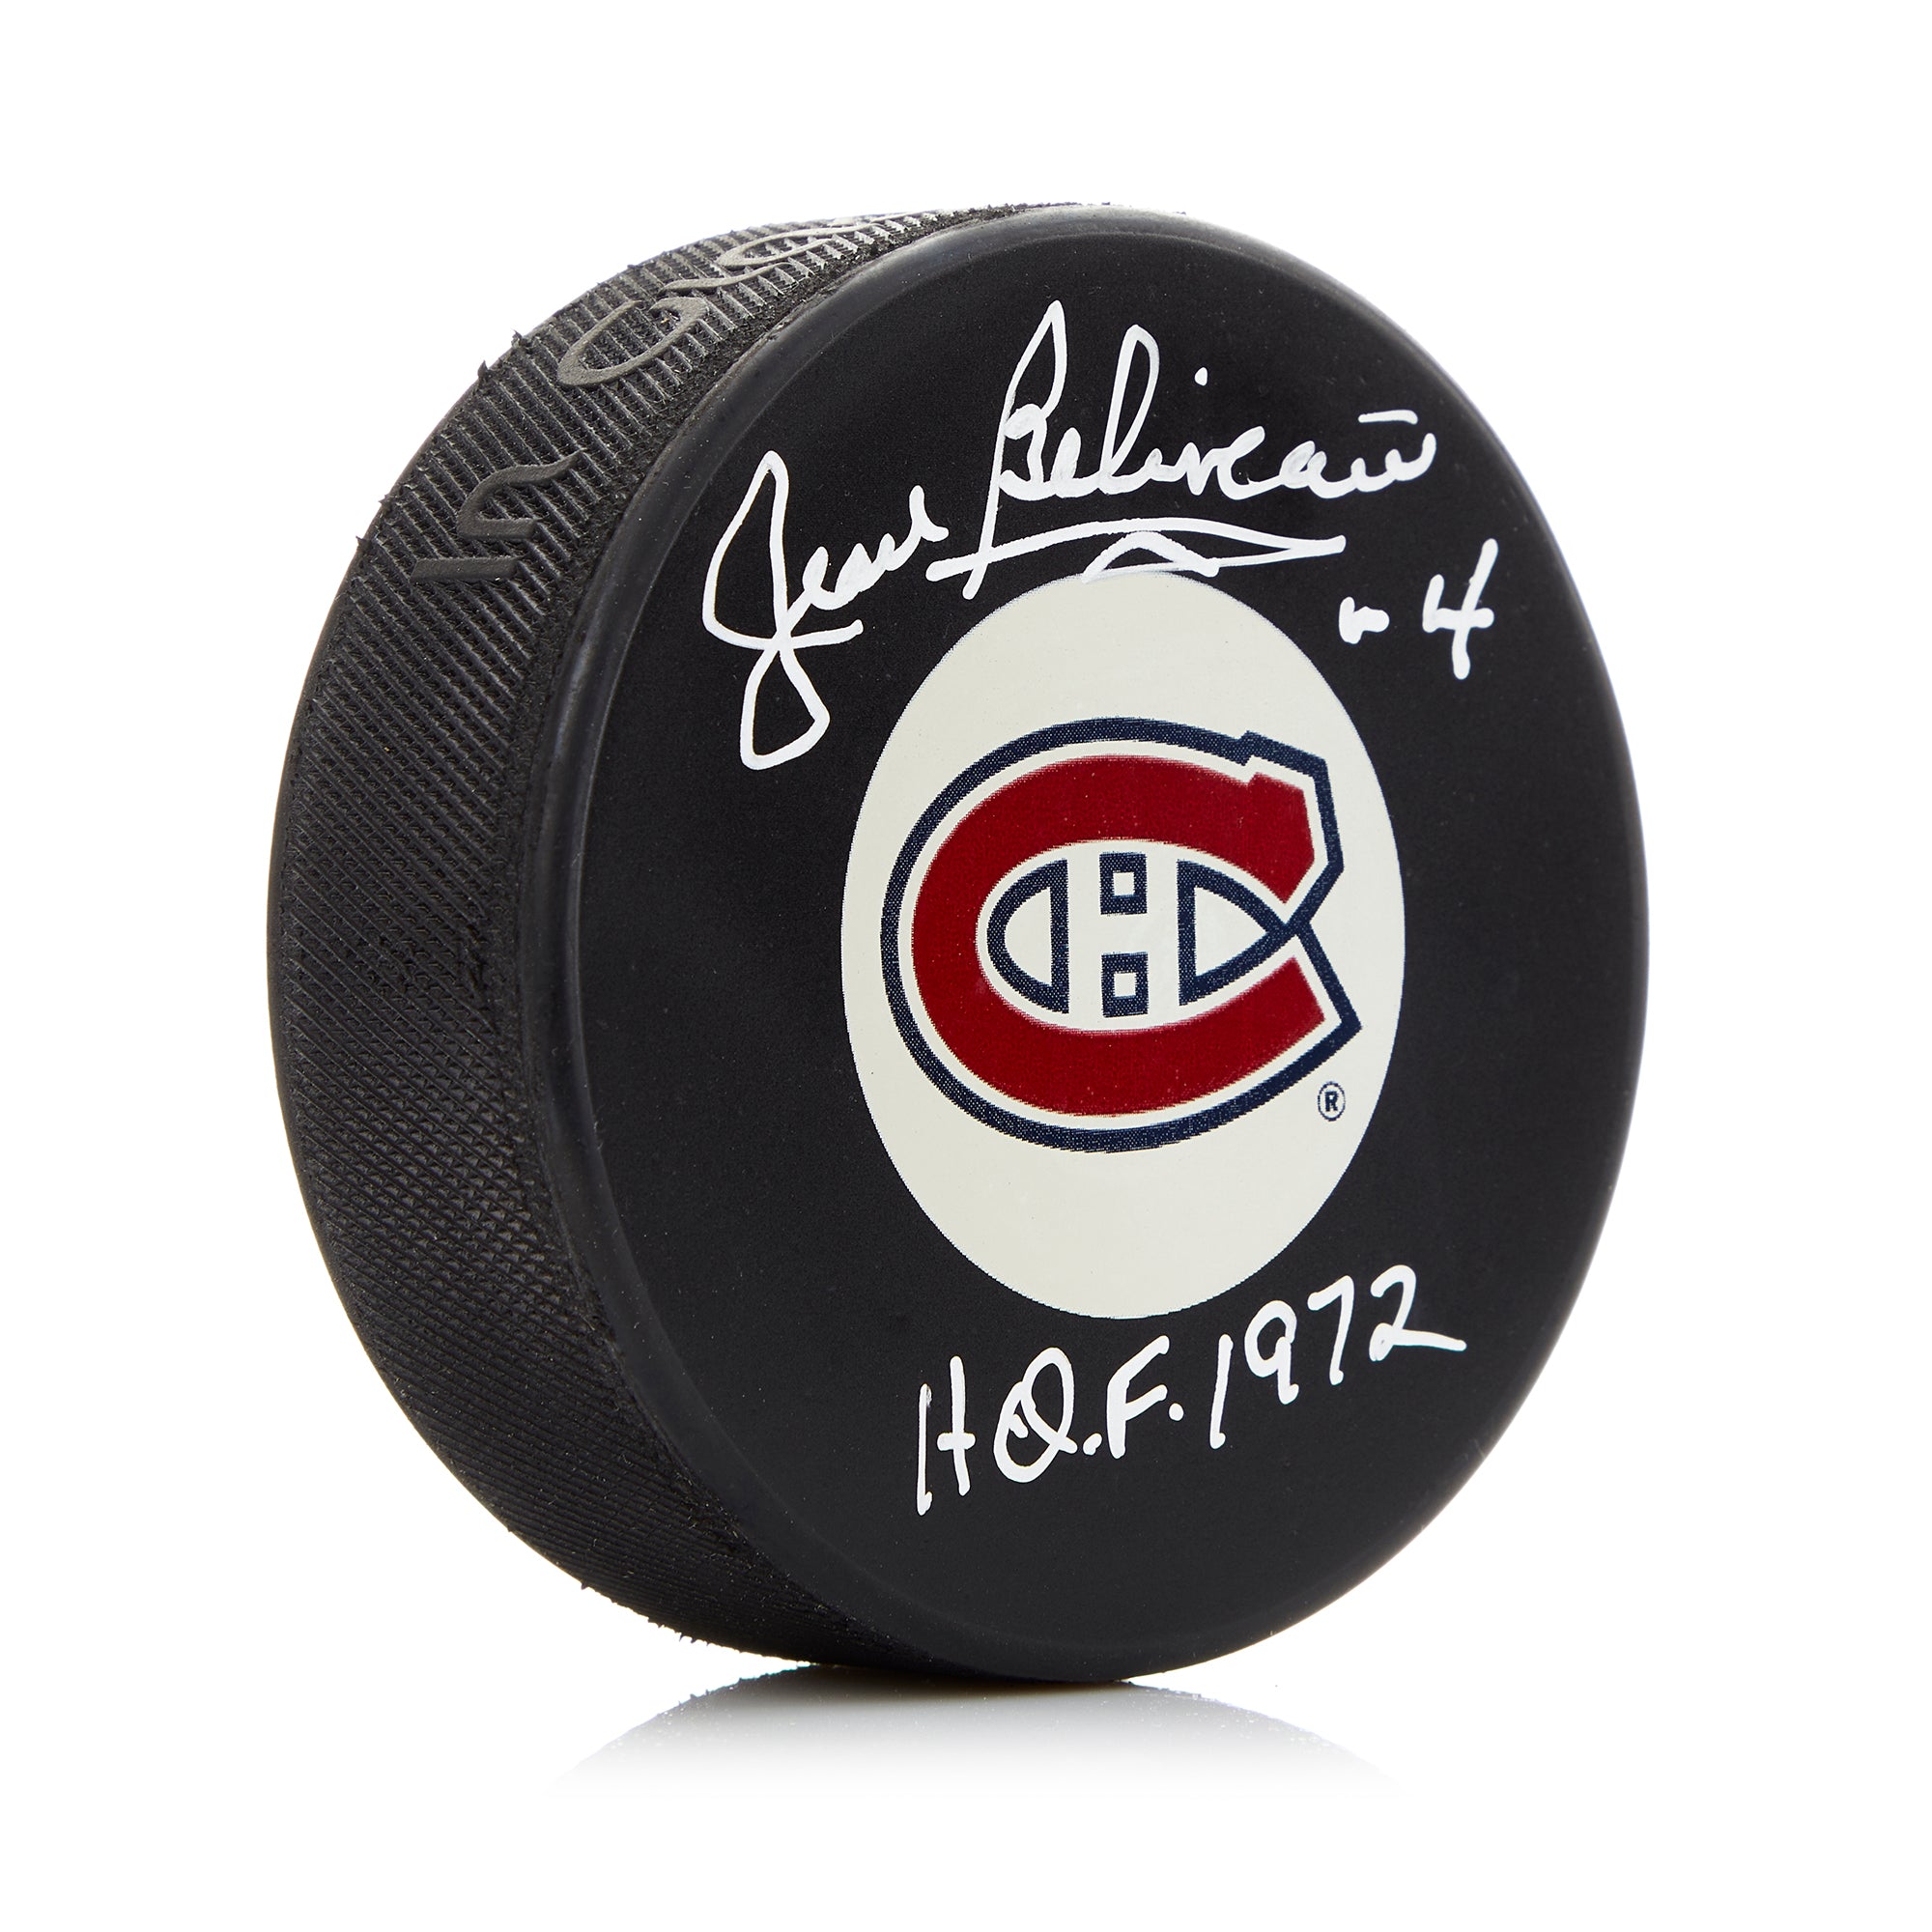 Jean Beliveau Montreal Canadiens Signed Hockey Puck with HOF Note